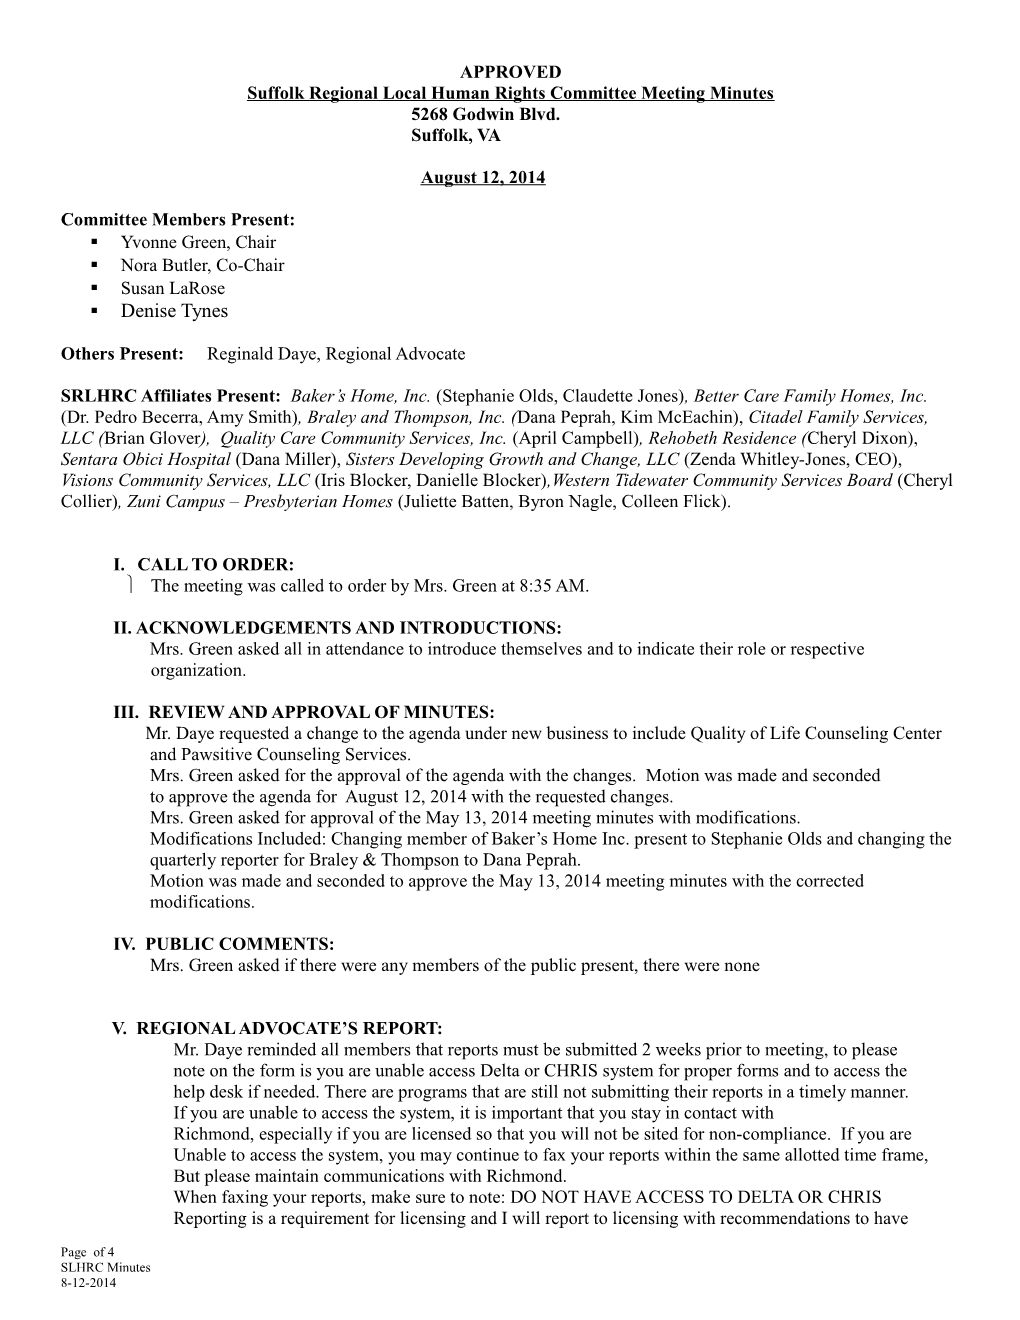 Suffolk Regional Local Human Rights Committee Meeting Minutes